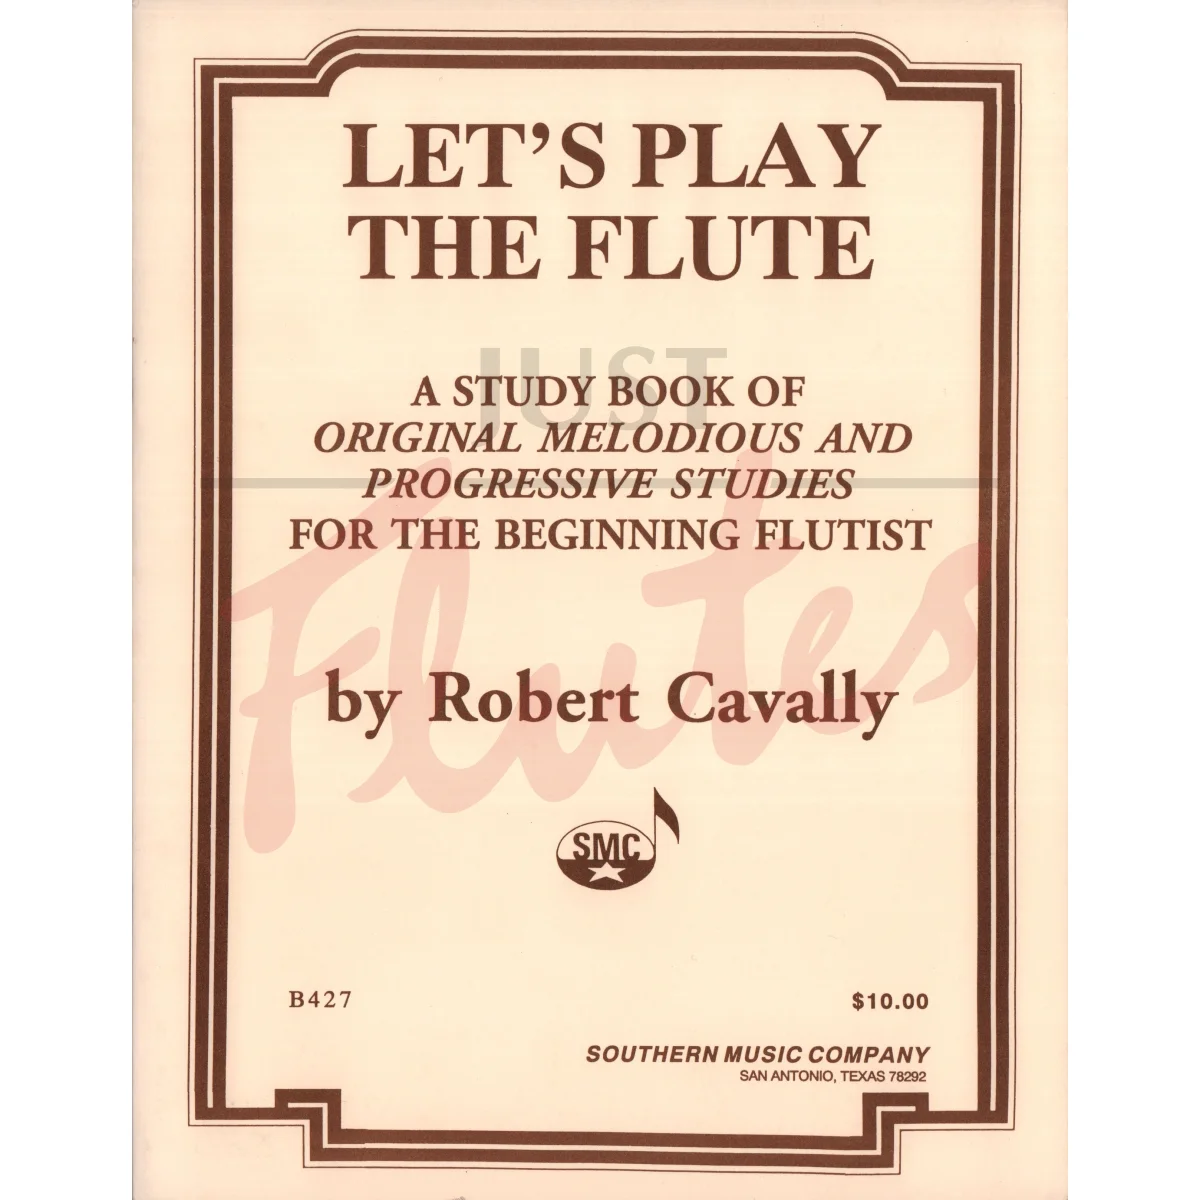 A Study Book of Original Melodious and Progressive Studies for the Beginning Flutist